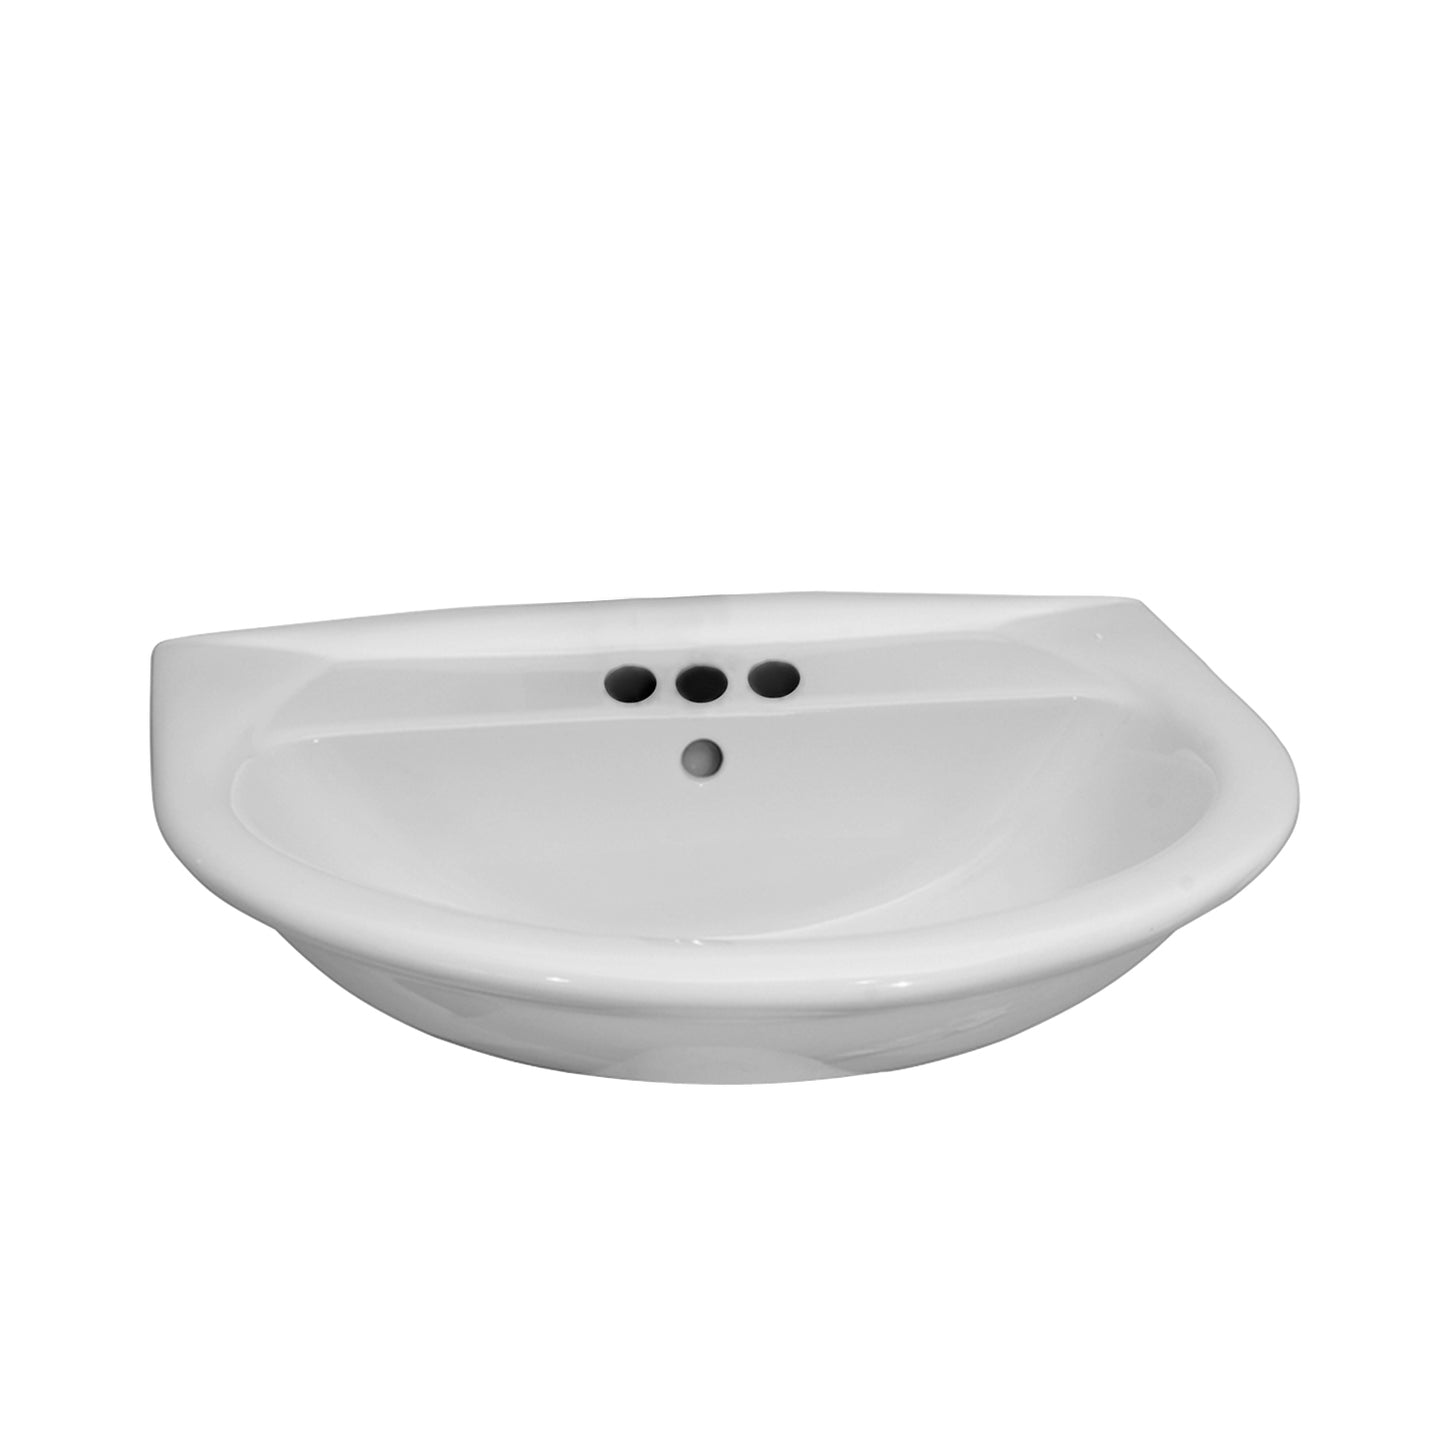 Karla 650 Wall Hung Sink for 8" Widespread and Overflow White